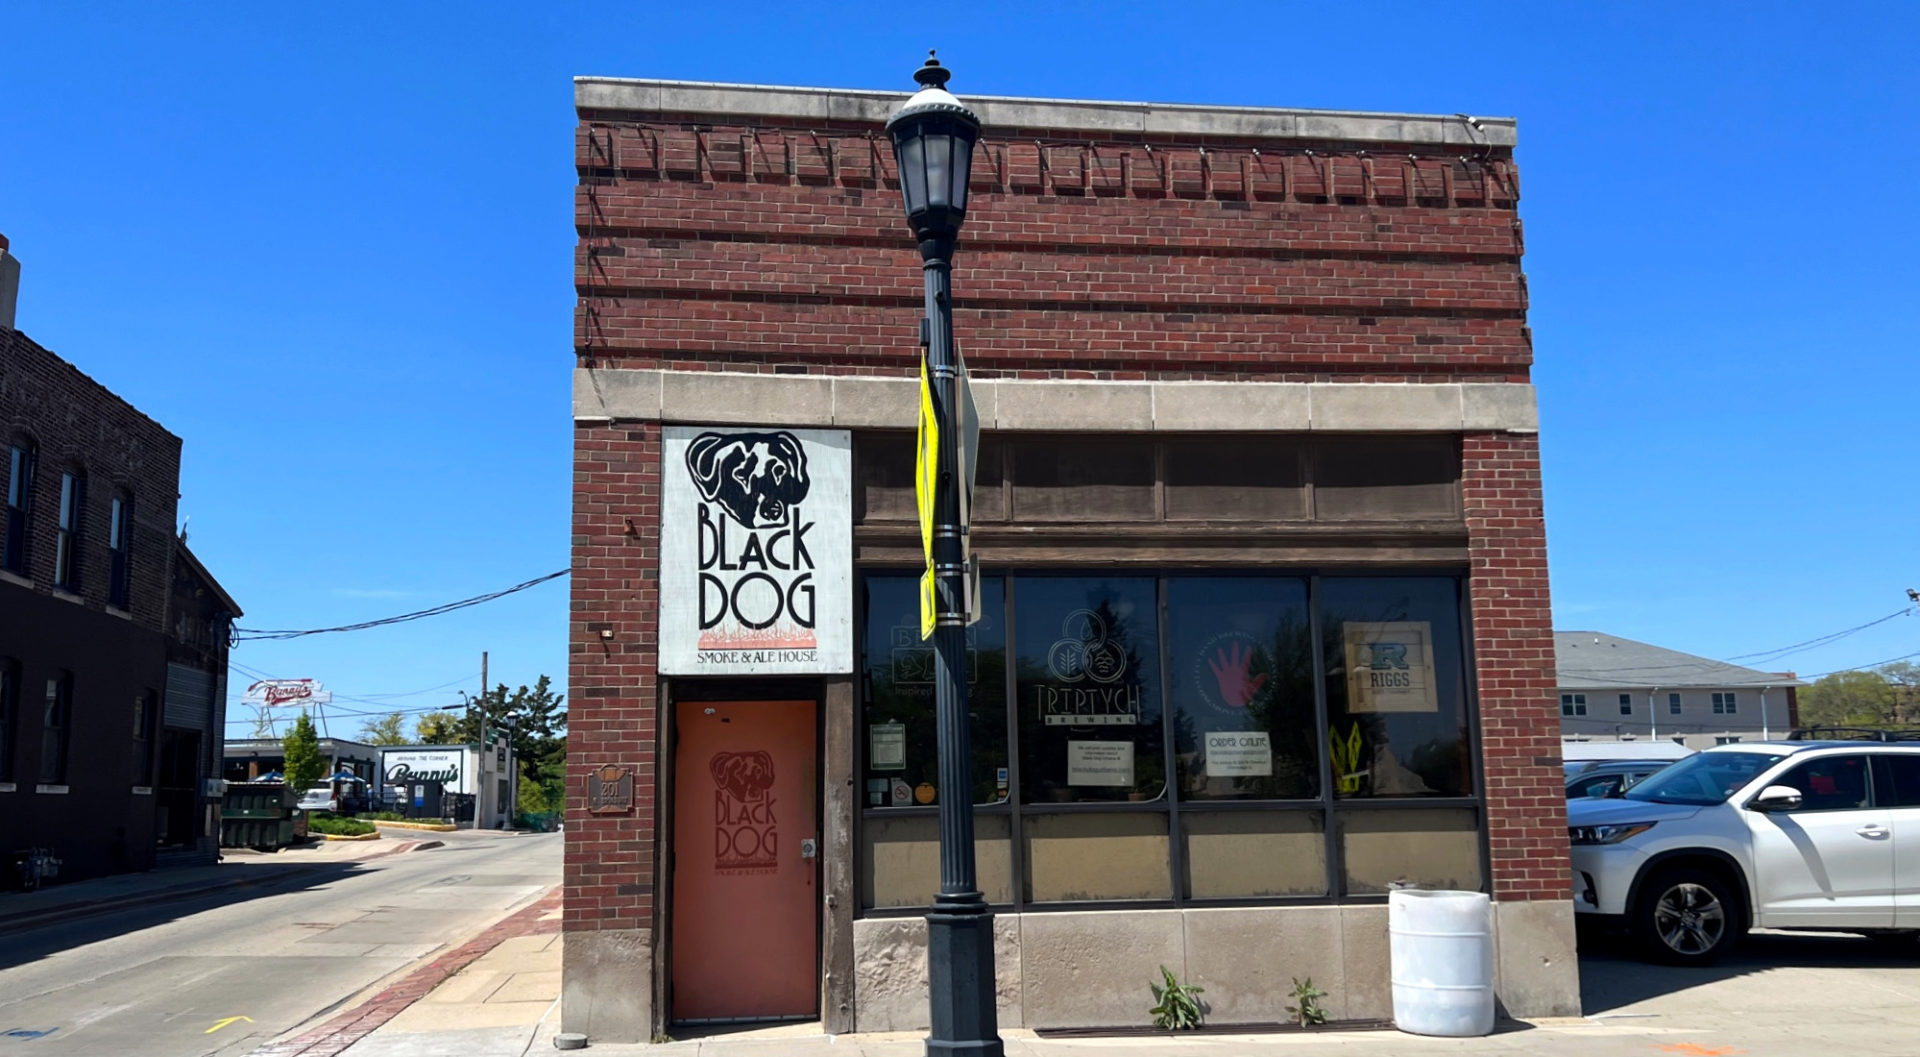 The exterior of Black Dog Urbana on a sunny day with a bright blue sky. Photo by Alyssa Buckley.